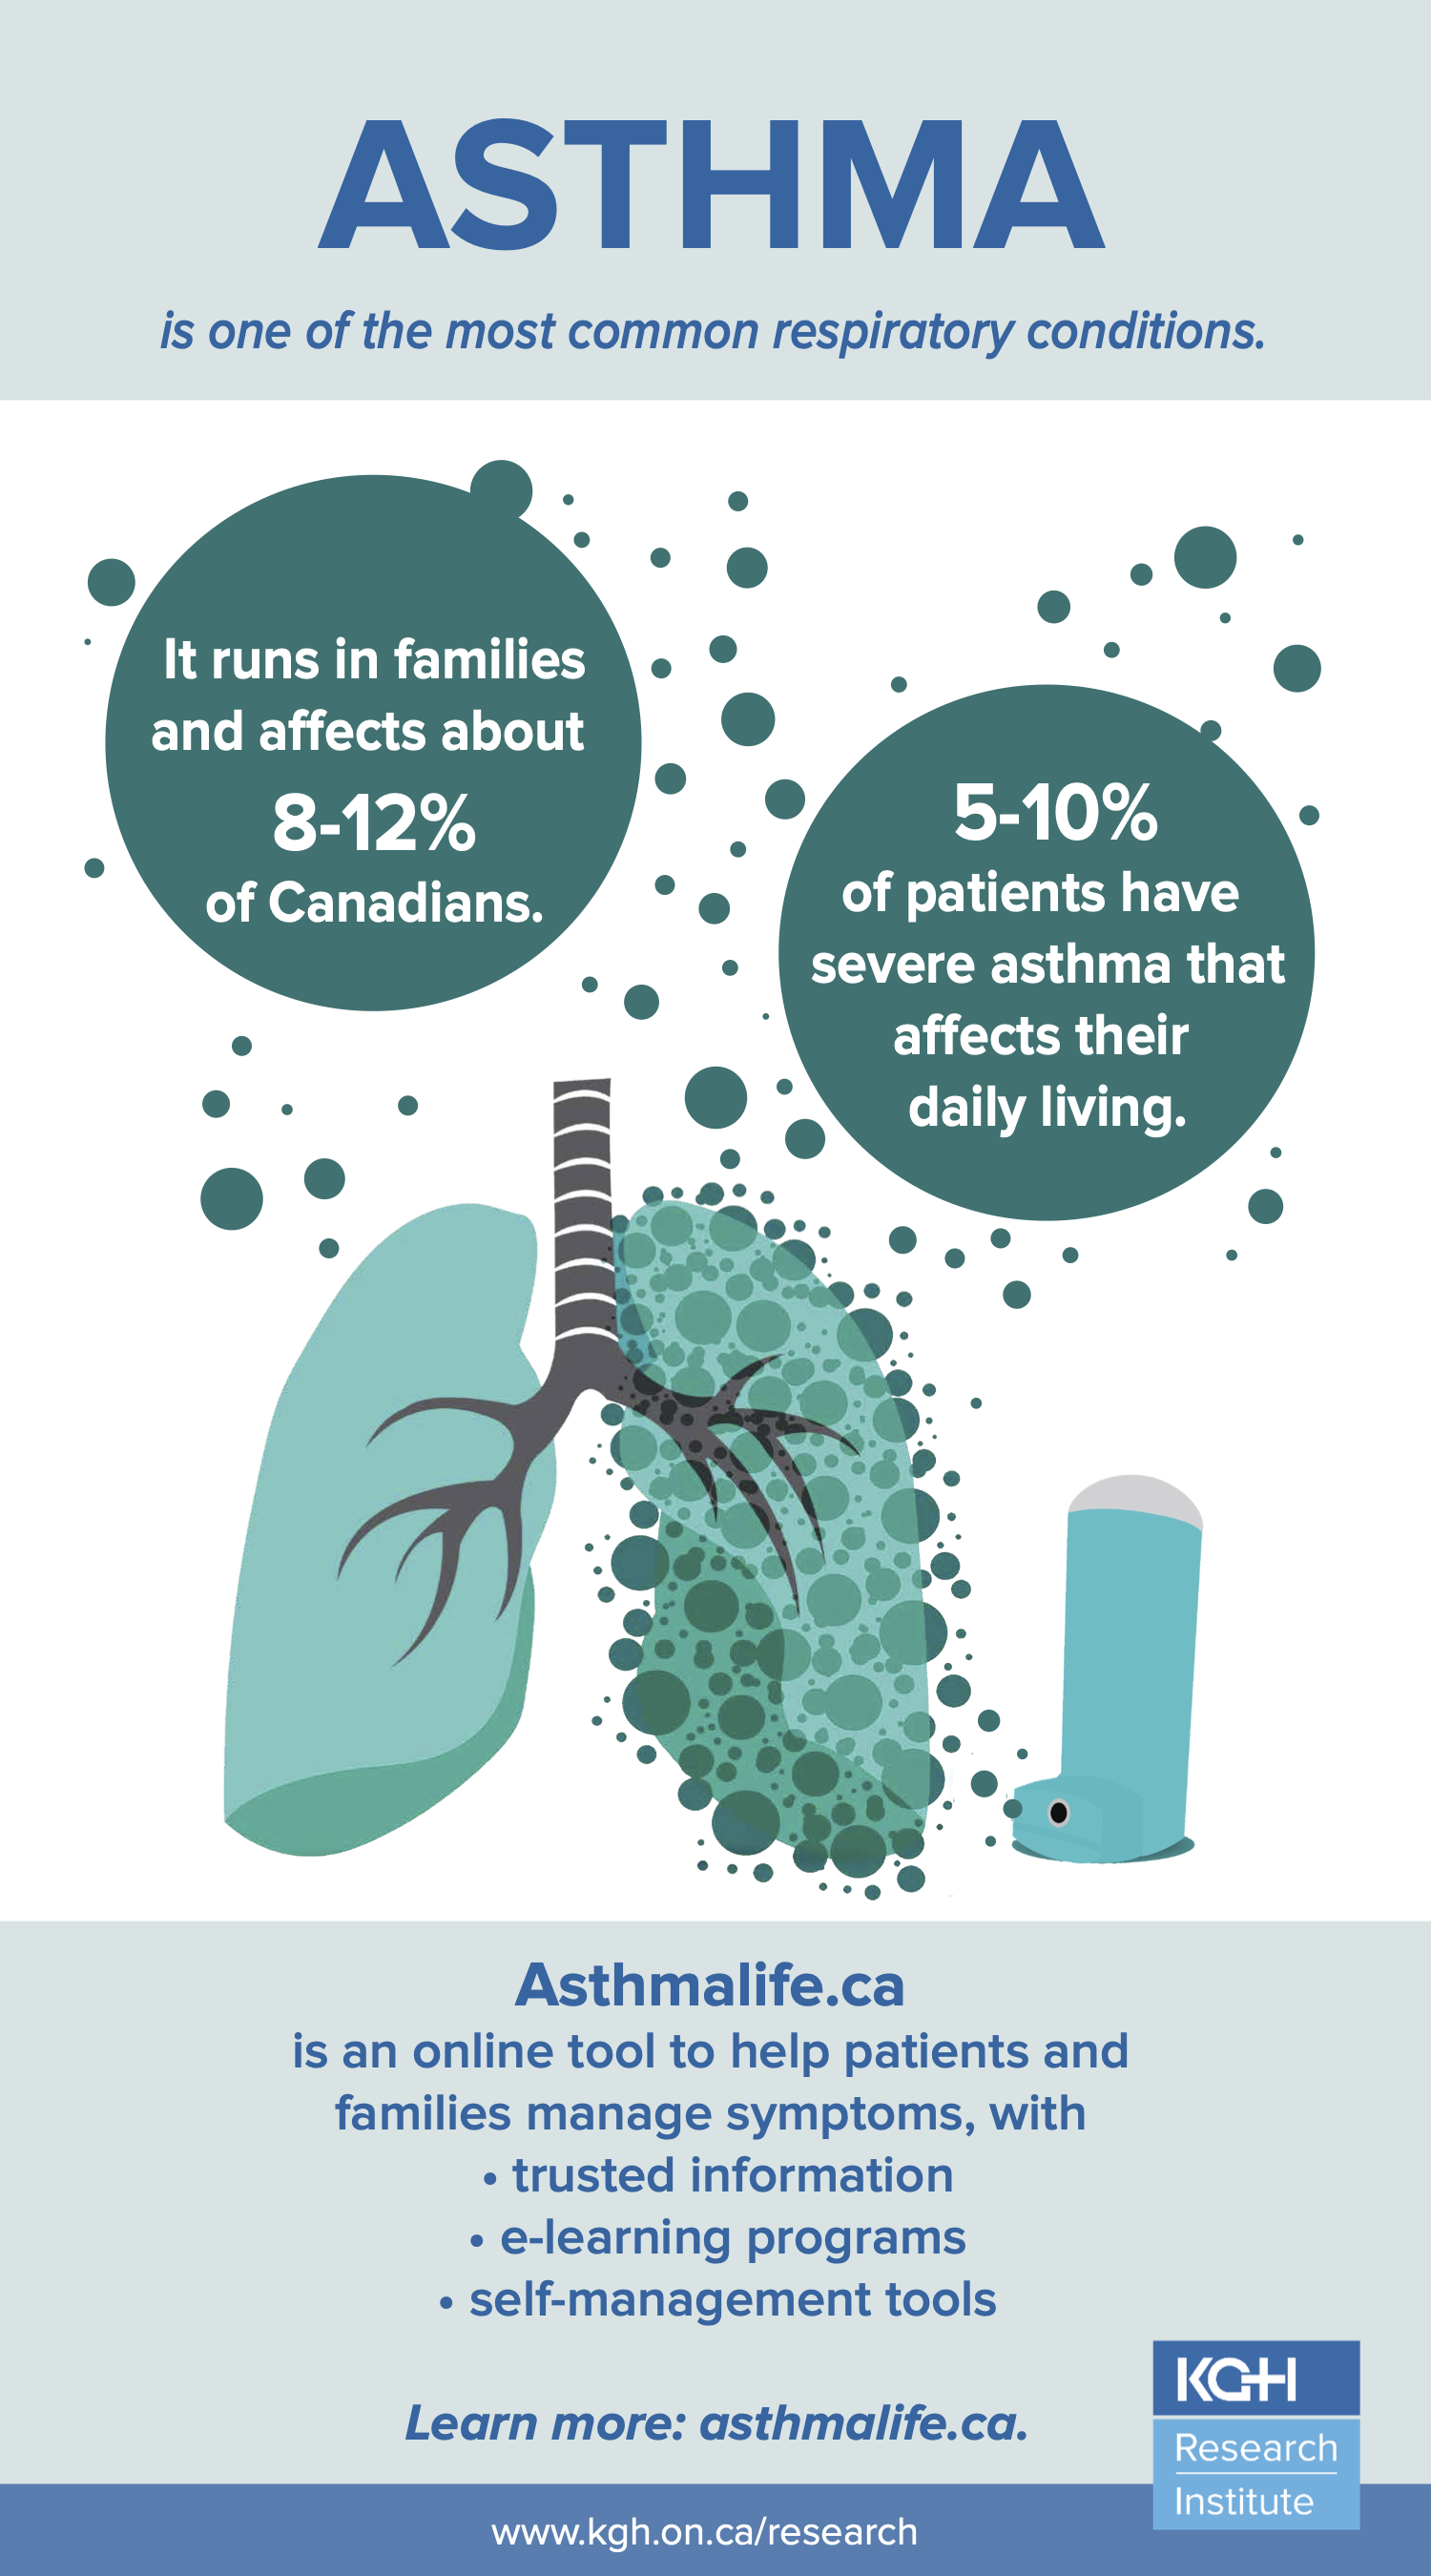 Asthma infographic done for KGHRI